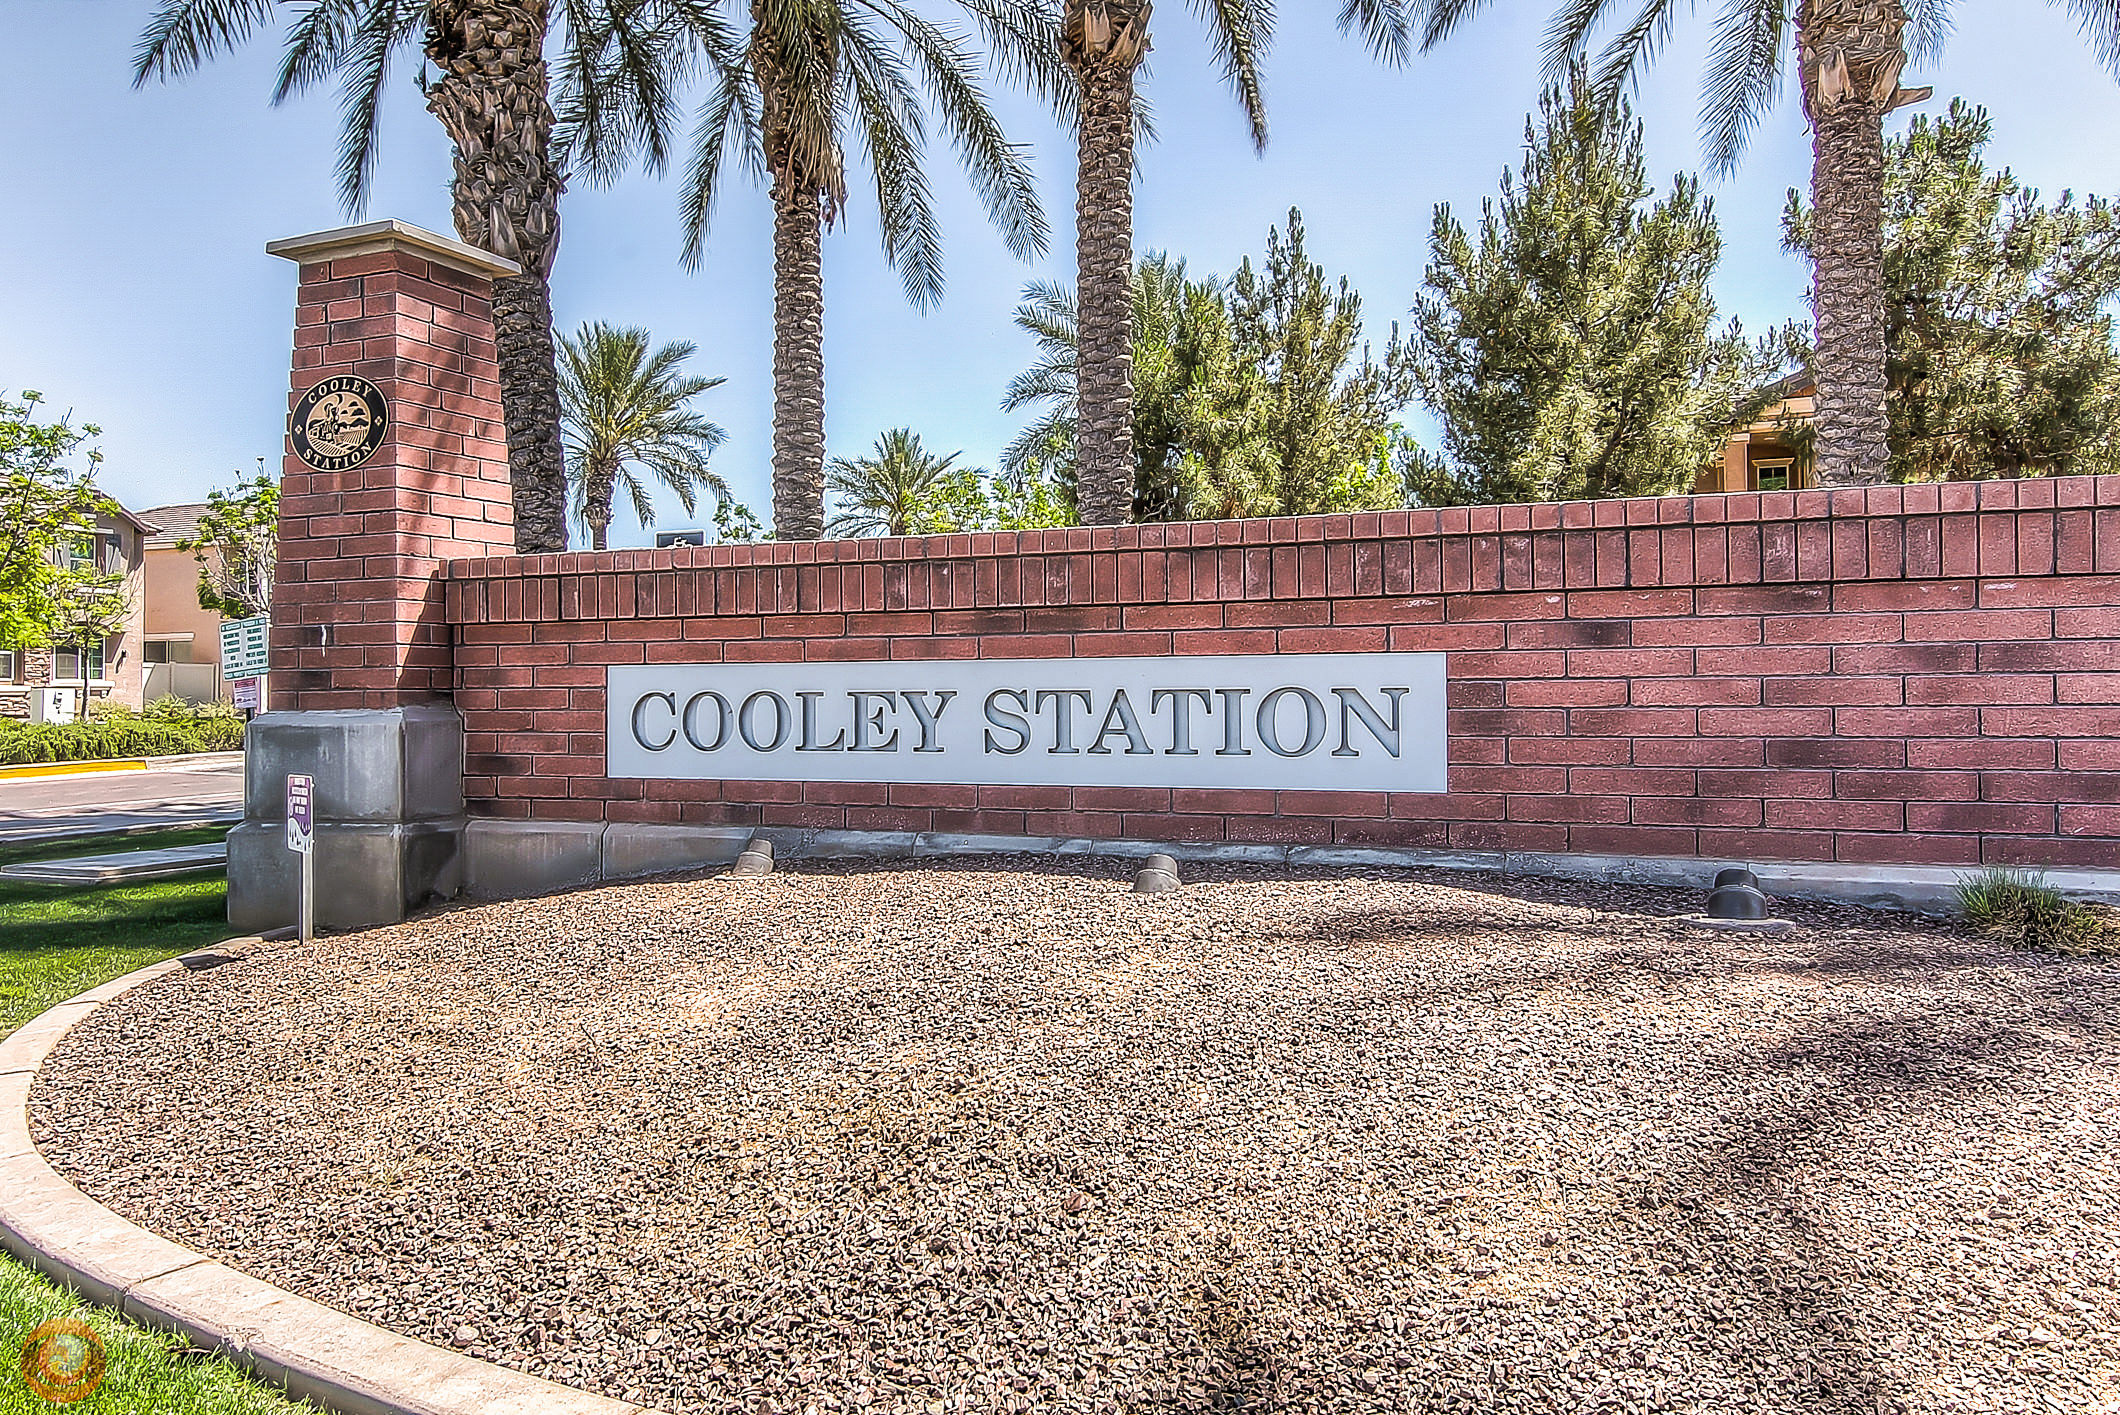 Cooley Station